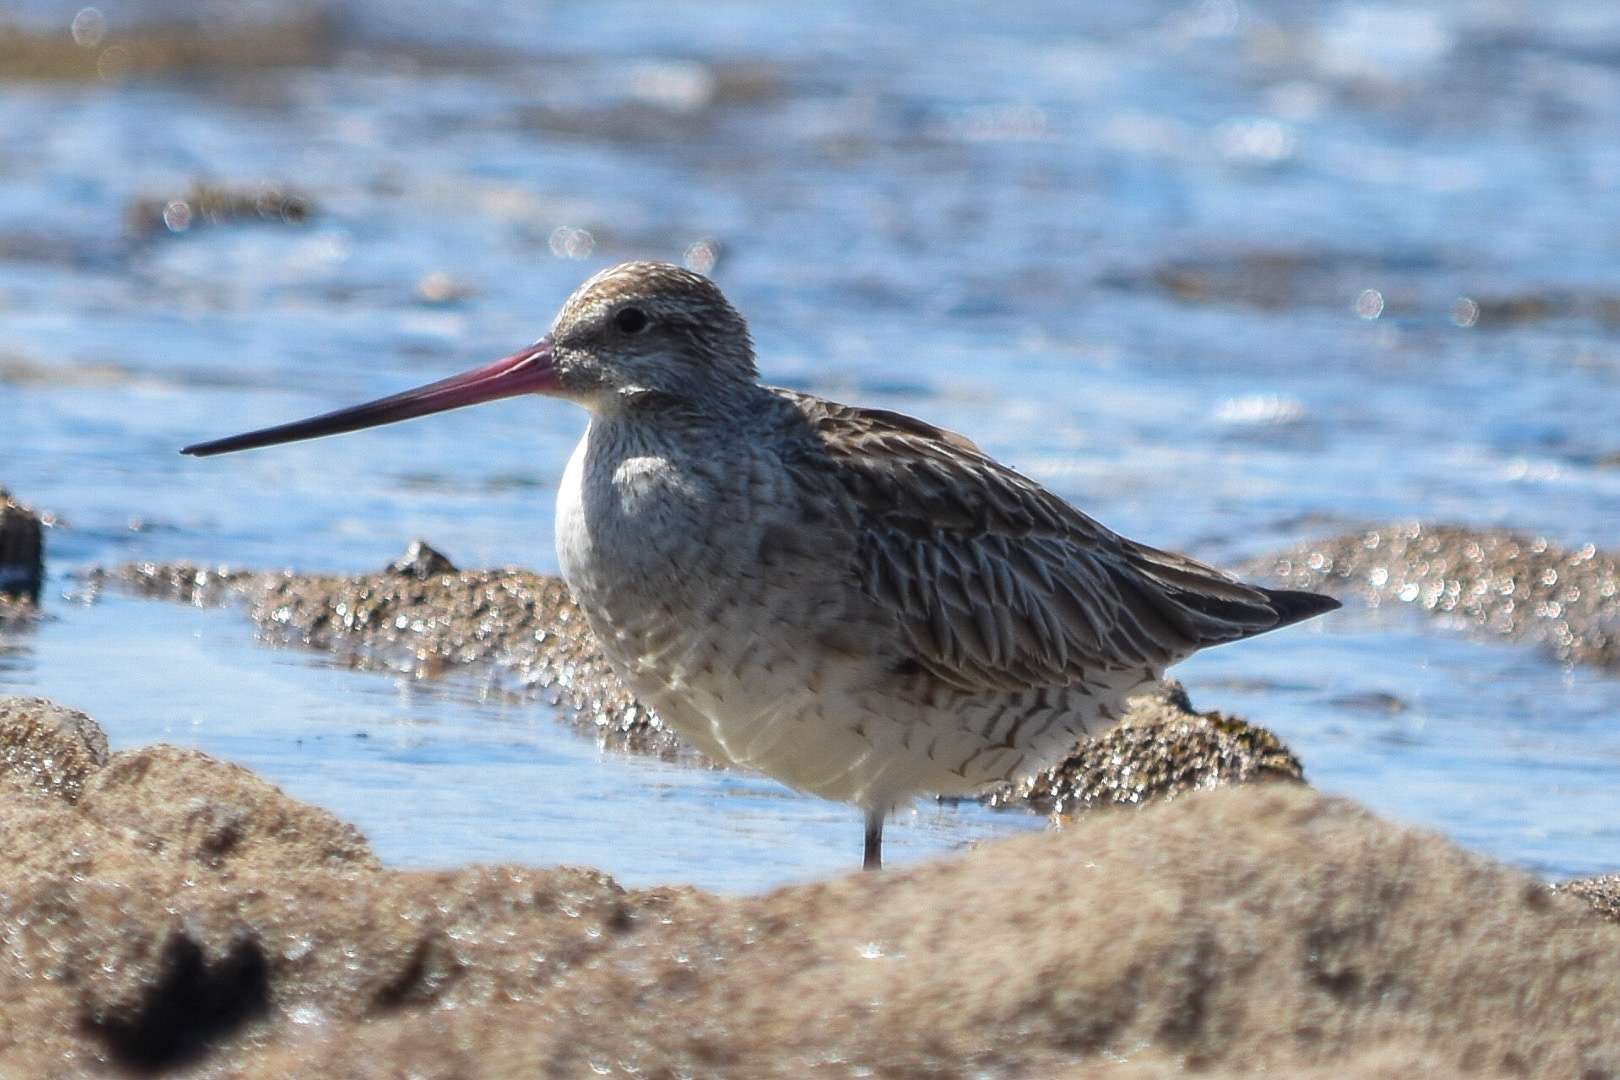 Bar-tailed Godwit by Duncan Leitch at Wembury Point